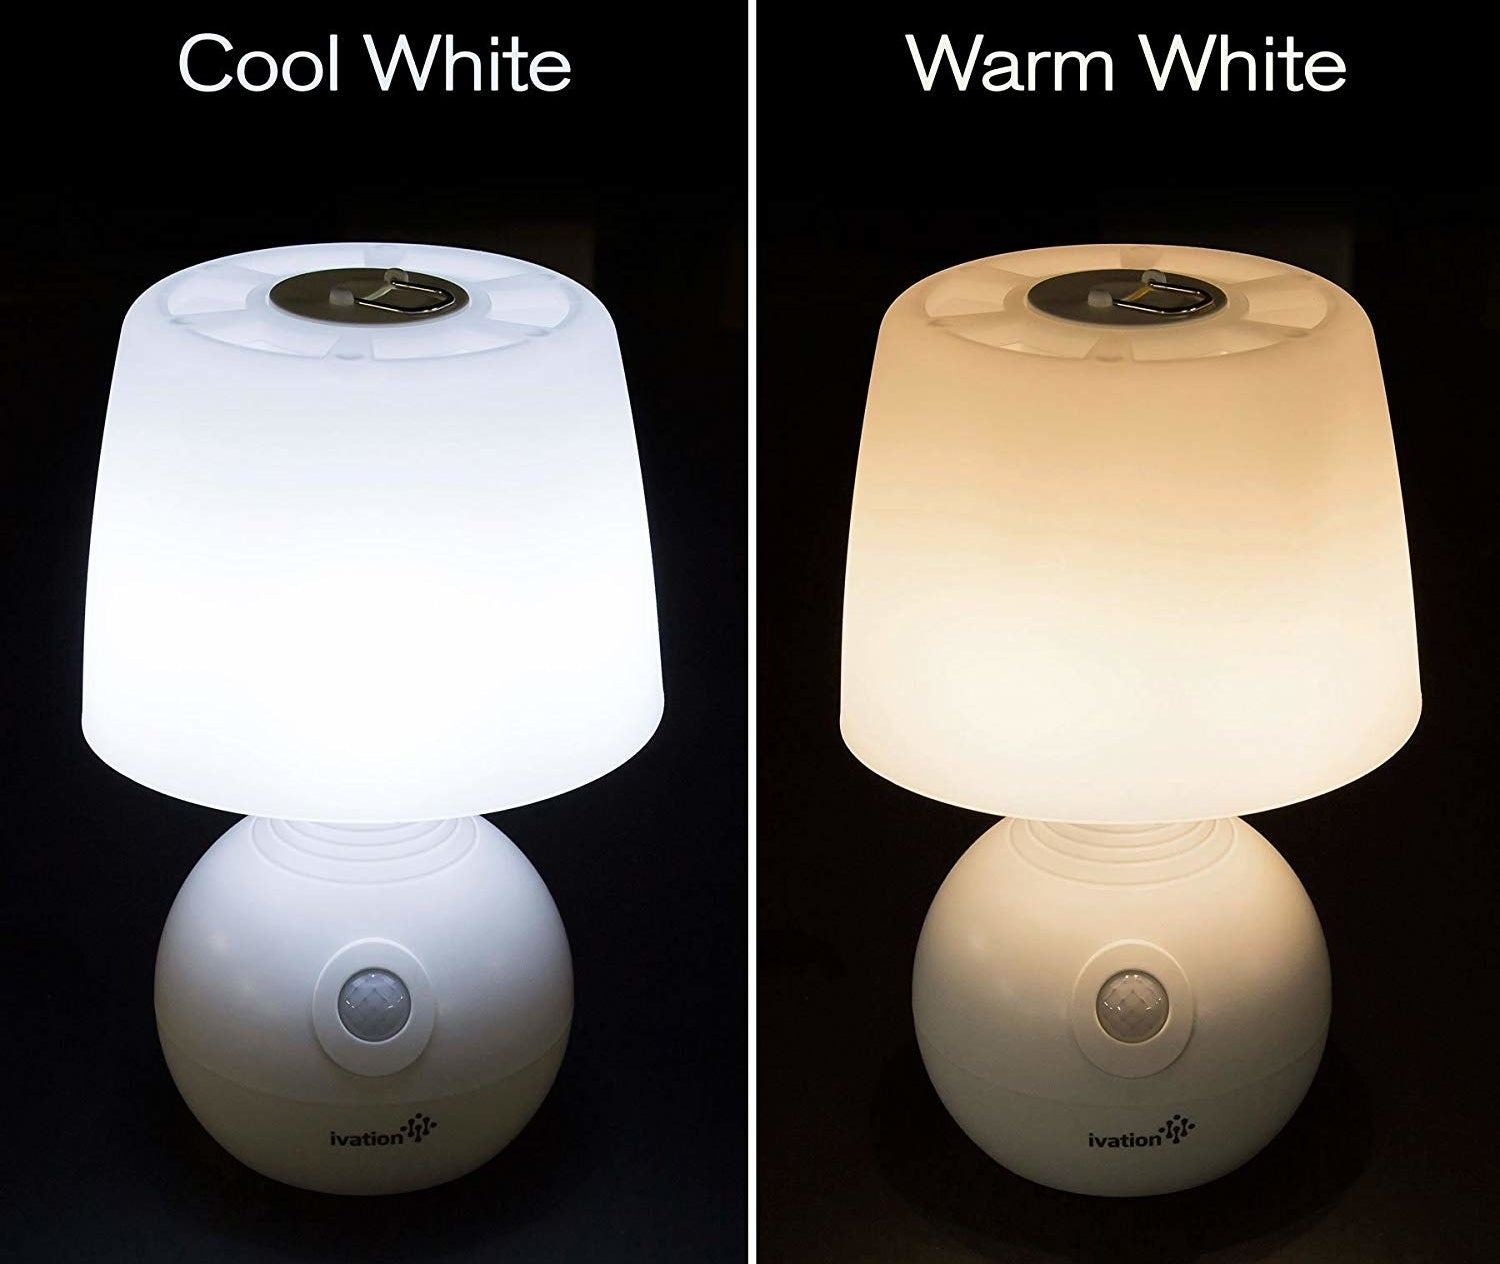 the lamp lit up in cool white and then warm white